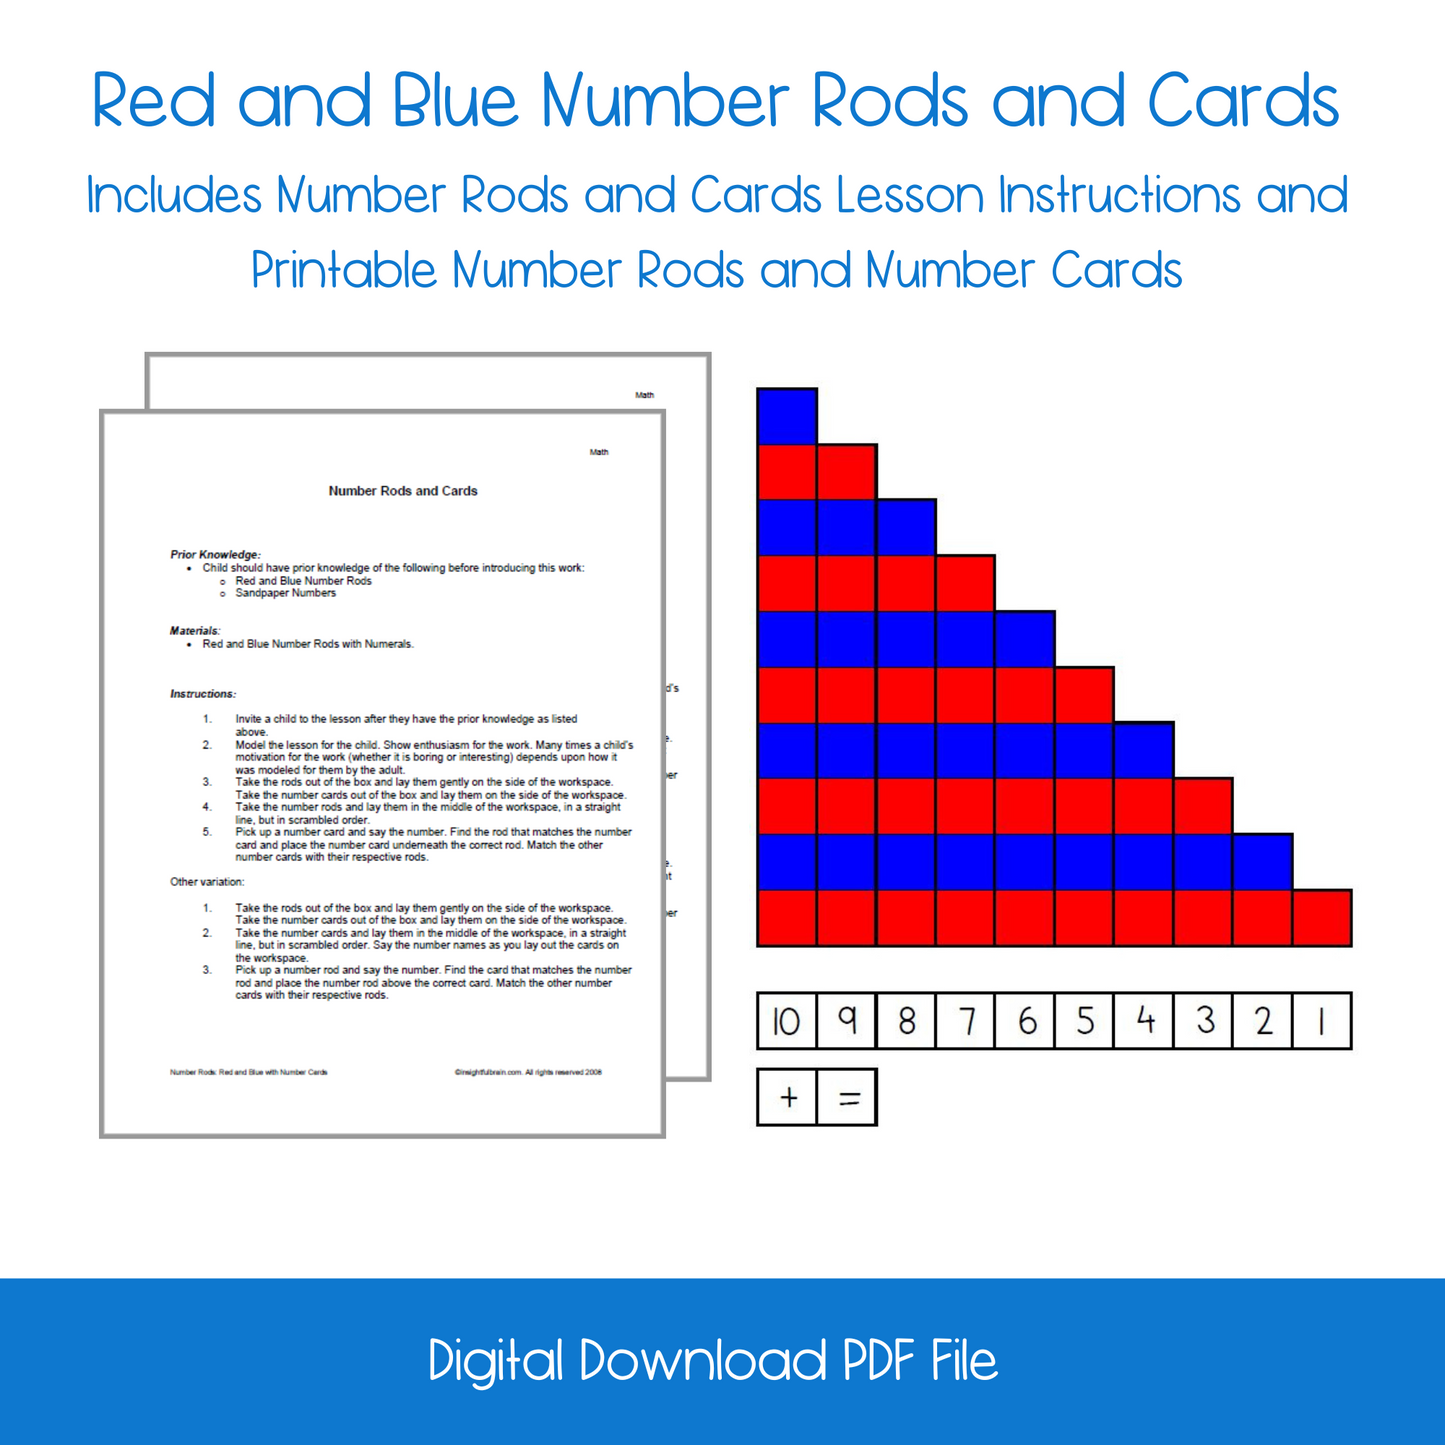 Printable montessori red and blue rods, printable red and blue rods lesson activity, printable pre-school number and number sense set, printable homeschool kindergarten number sense and counting activity